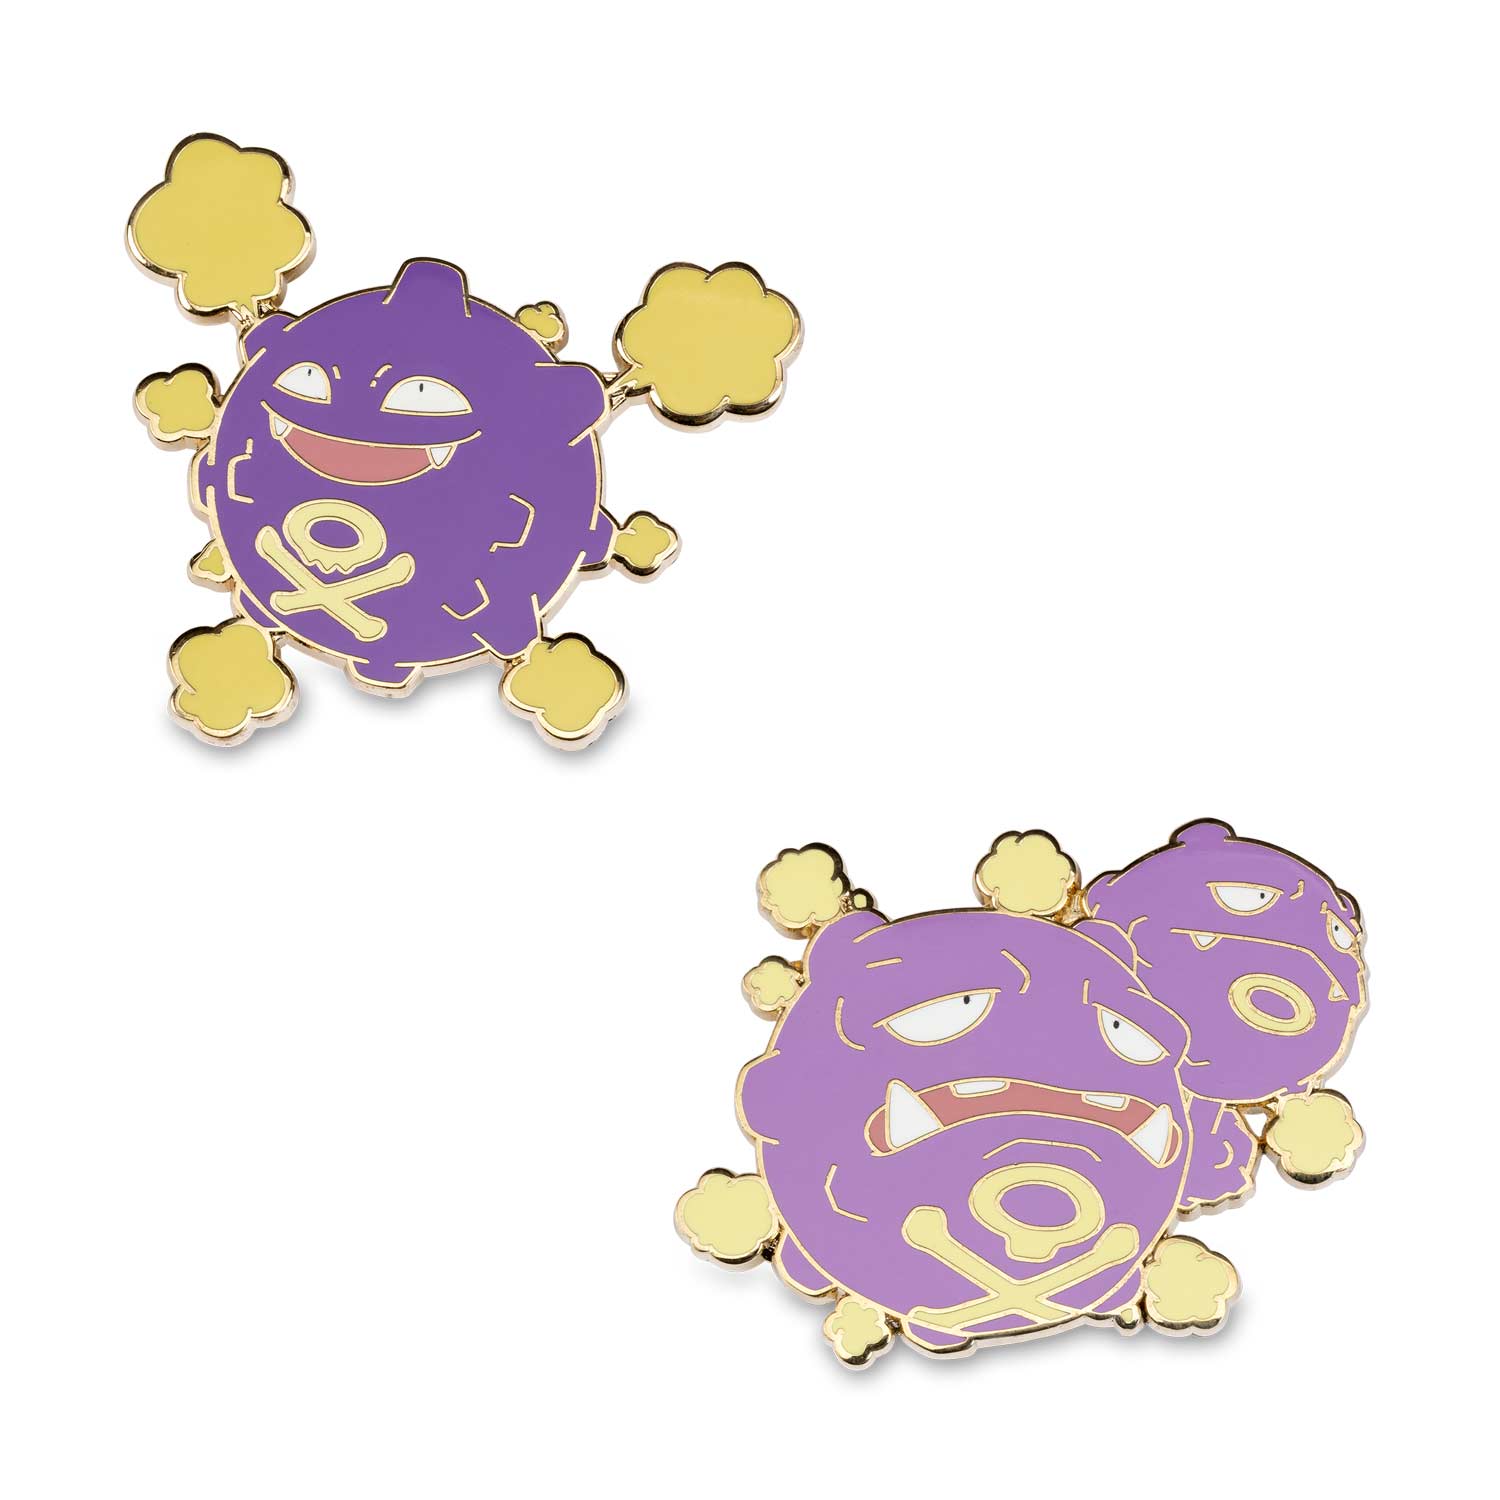 Koffing & Weezing Pokémon Pins (2-Pack) .